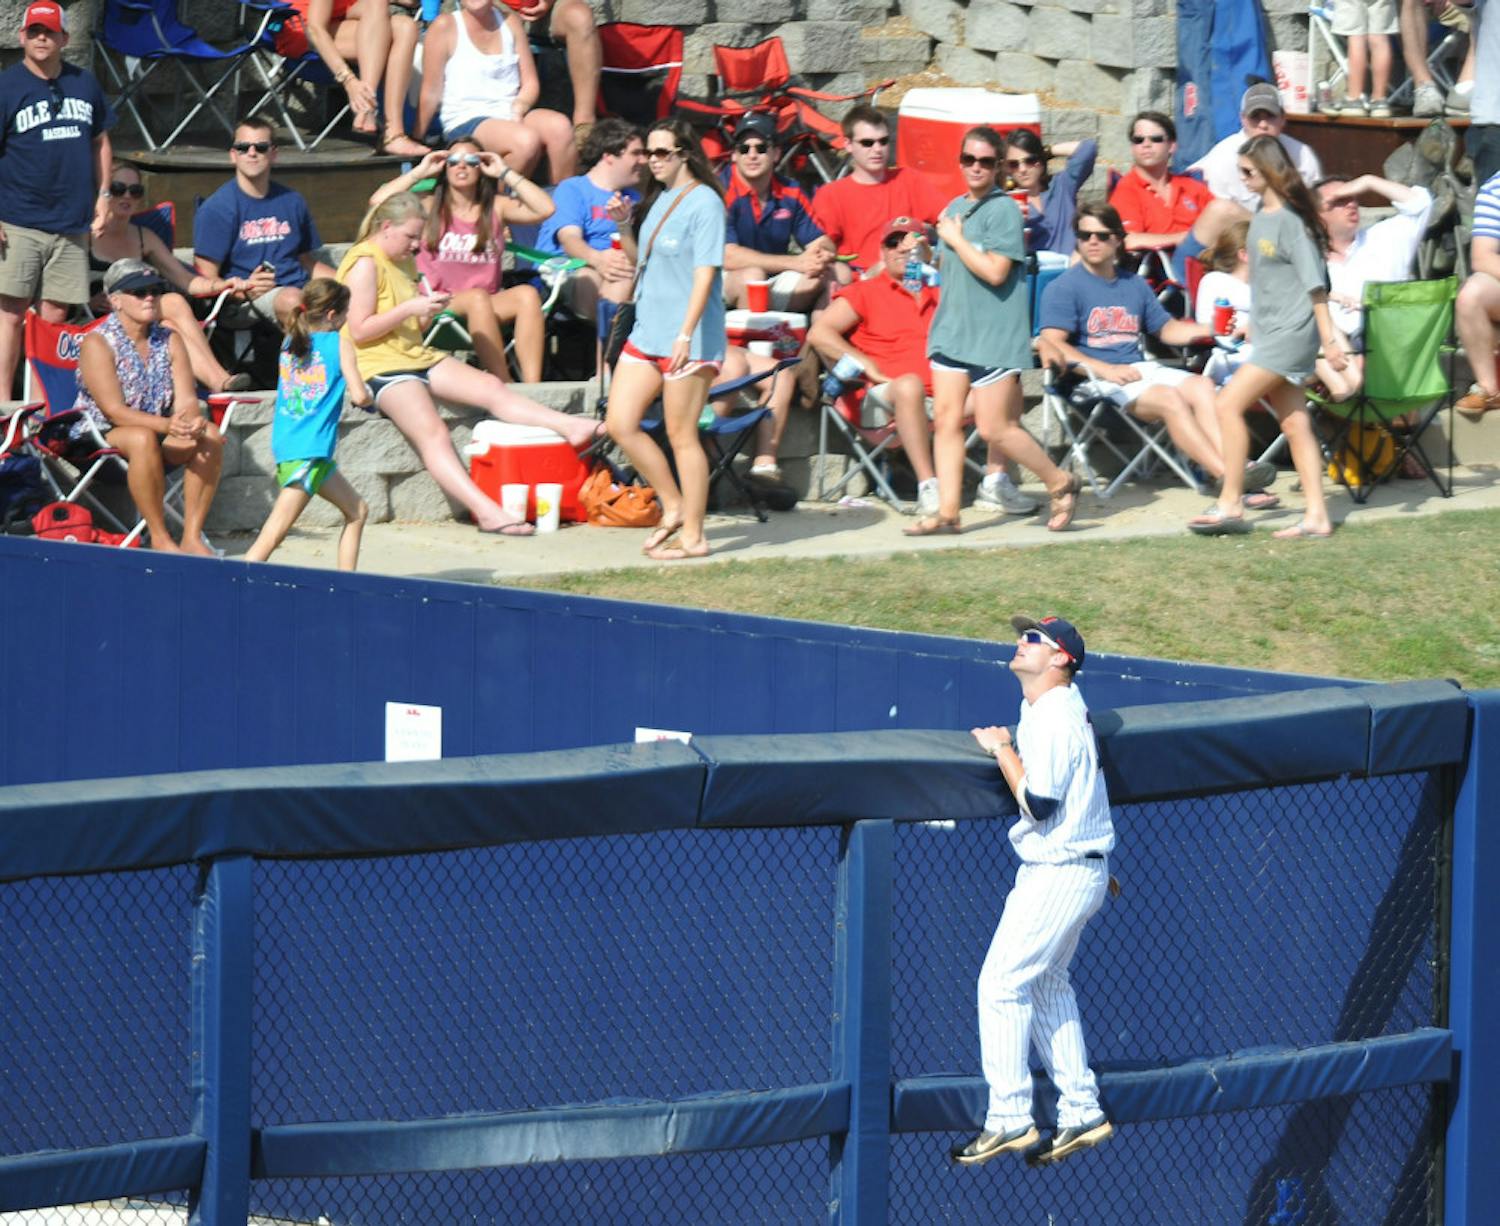 Mississippi's Tanner Mathis (12) watches as the ball clears the fence on a three-run home run hit by Florida's Vickash Ramjit during a college baseball game in Oxford, Miss. on Saturday, March 31, 2012. (AP Photo/Oxford Eagle, Bruce Newman)